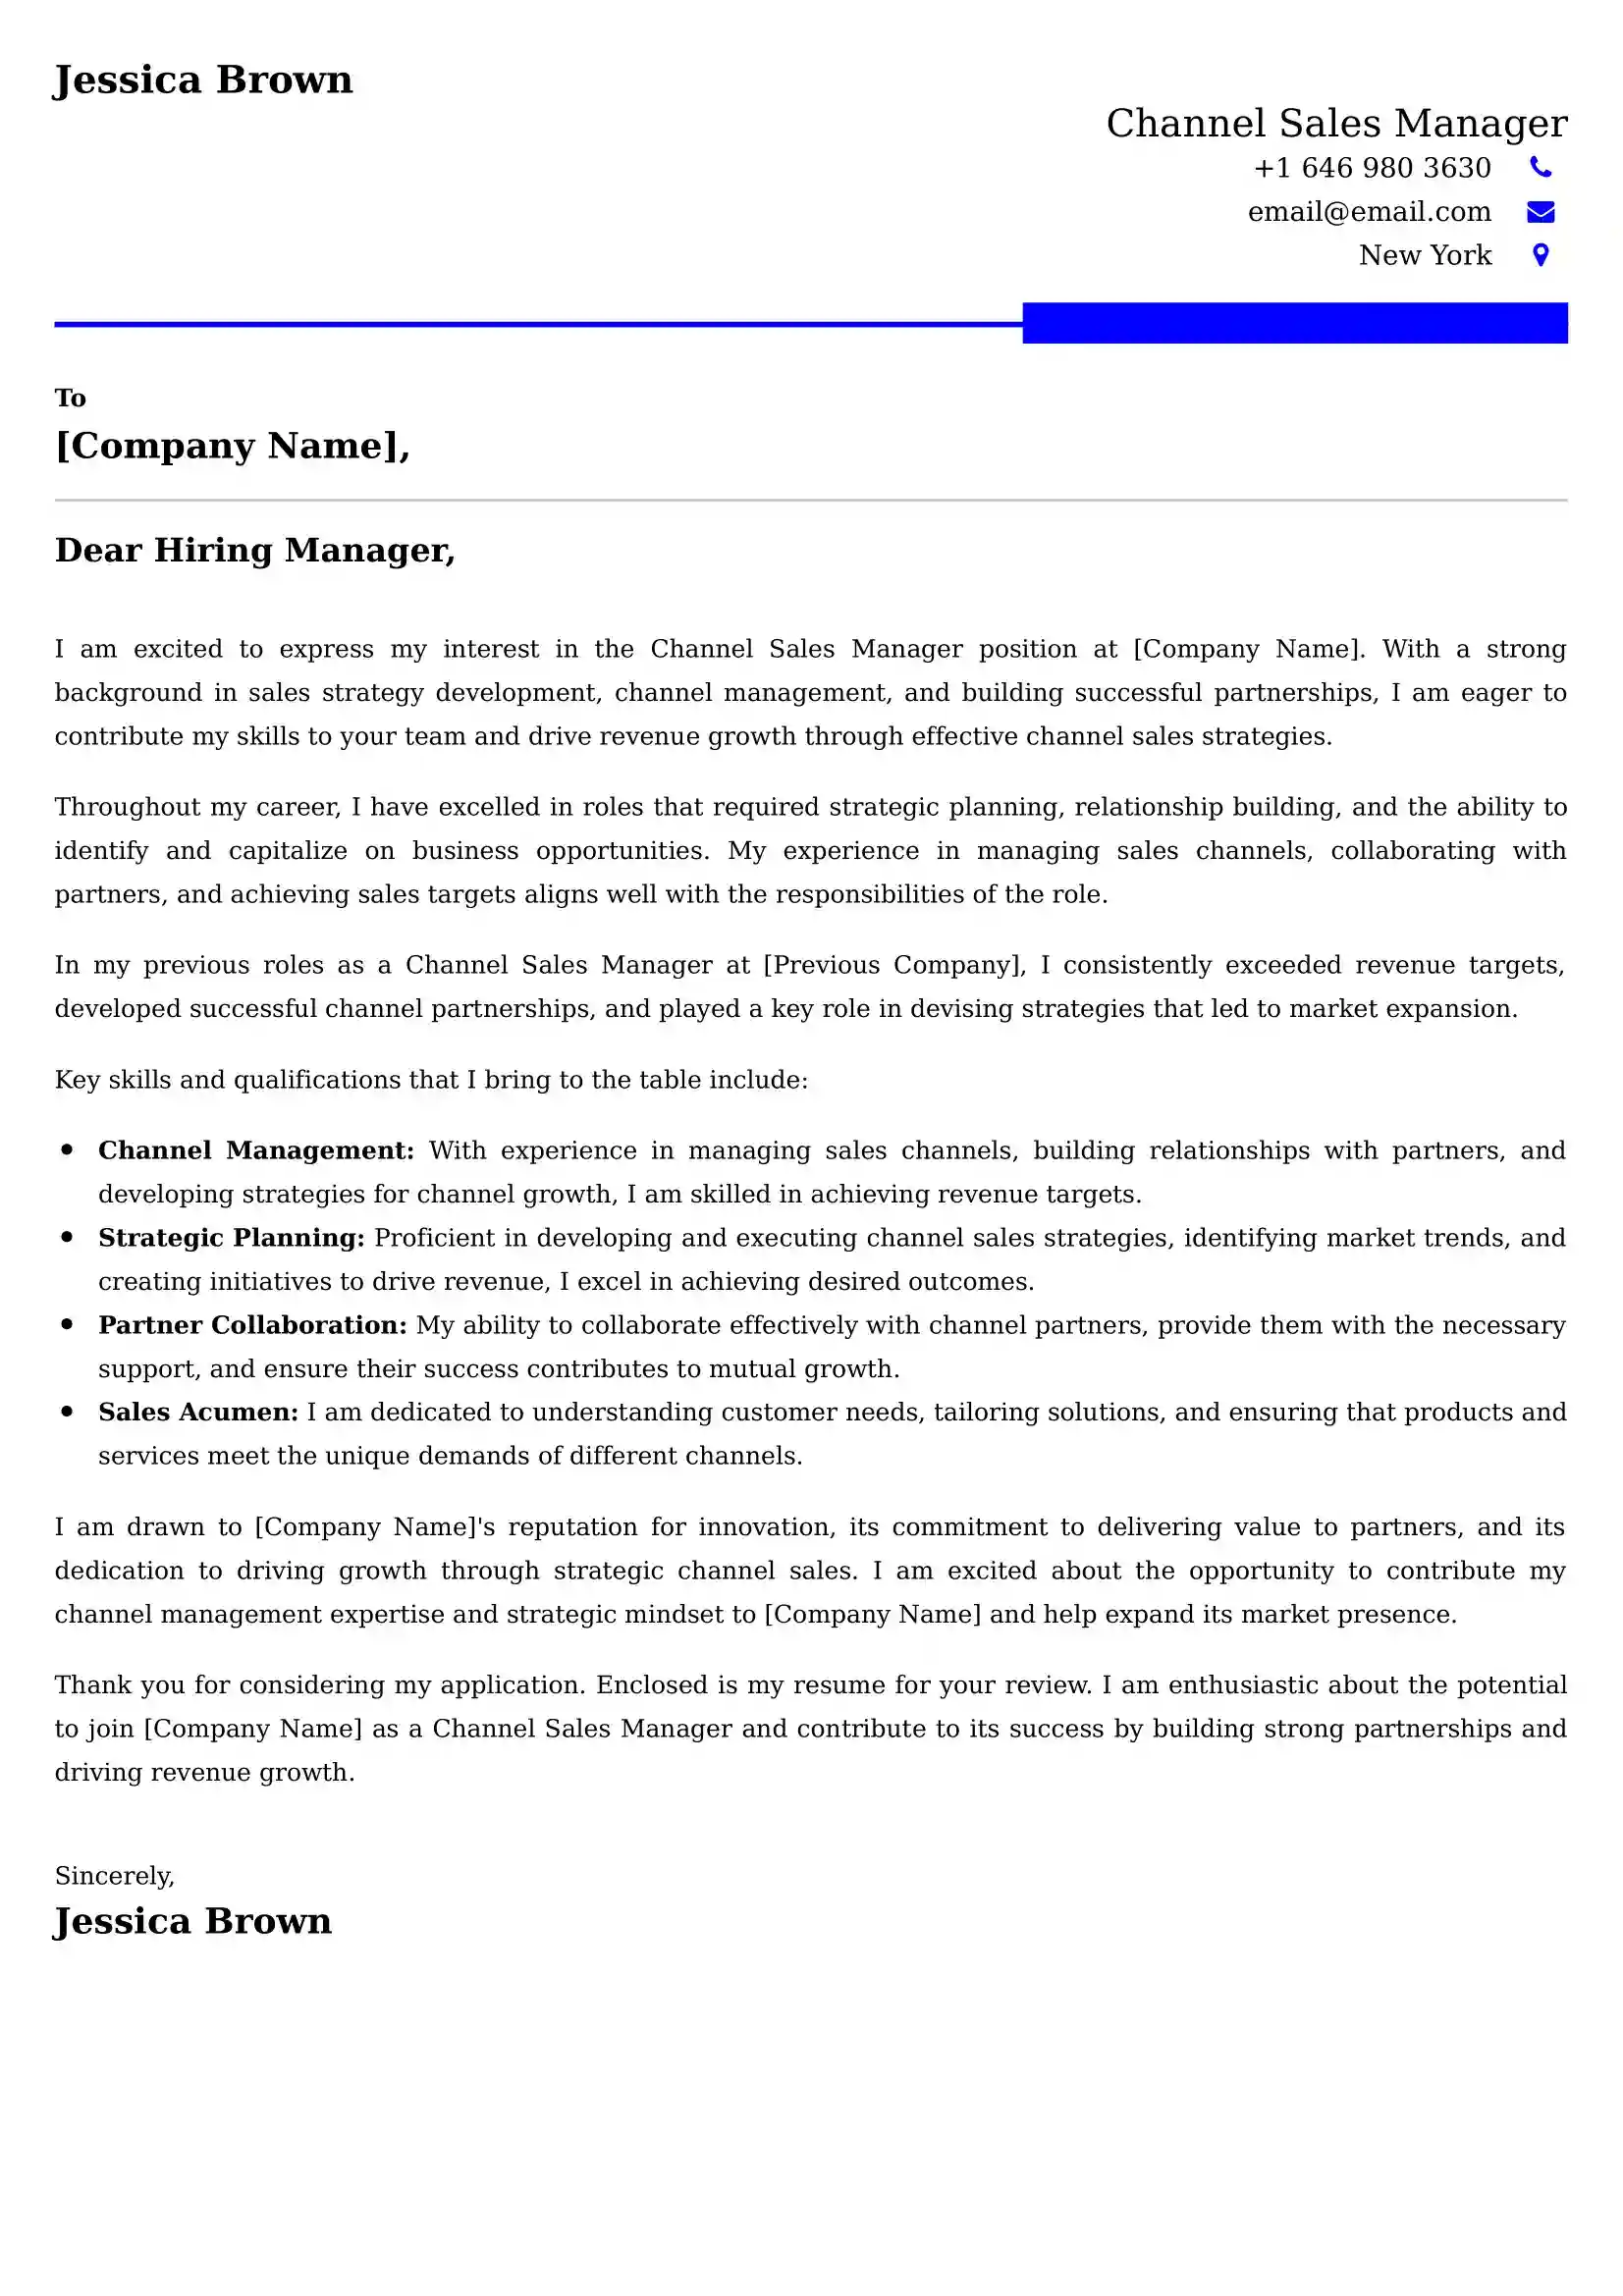 Channel Sales Manager Cover Letter Examples for UK 